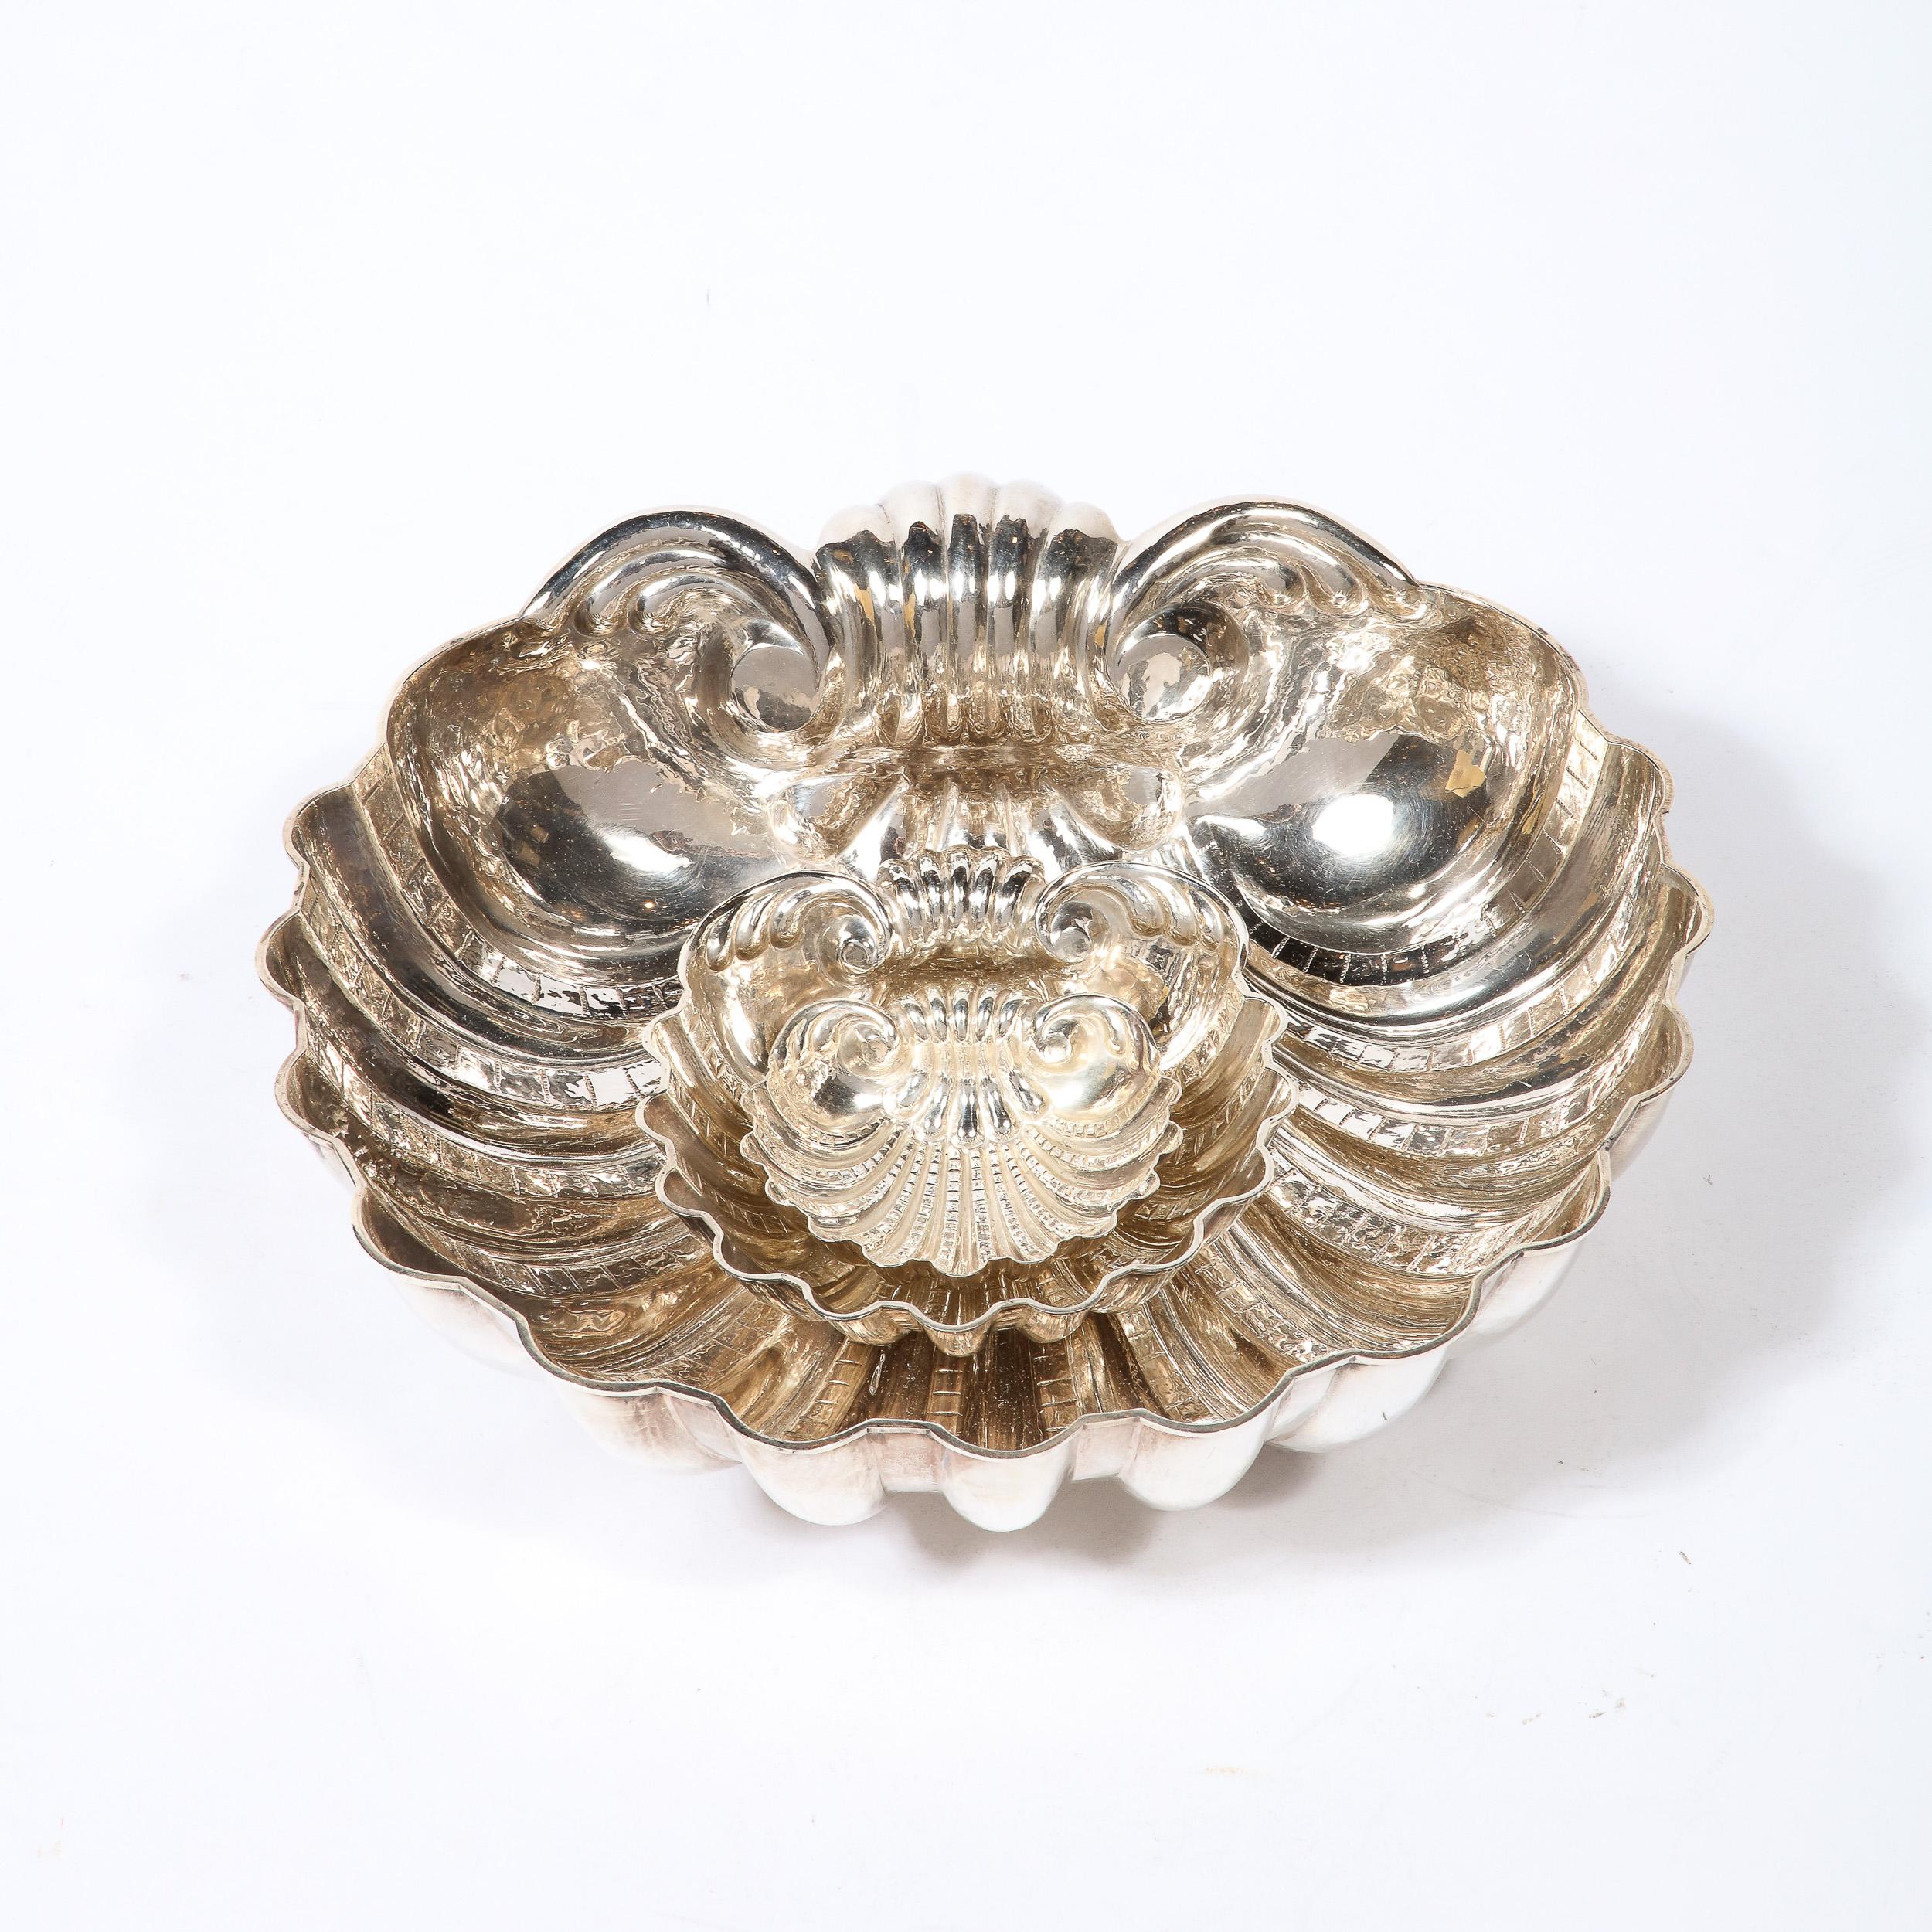 Established in Venice in 1846, Missiaglia is one of the world's premier makers of the finest jewelry objects, as well as a select number of bespoke sterling silver tabletop accessories. This handwrought set of three scallop form decorative bowls